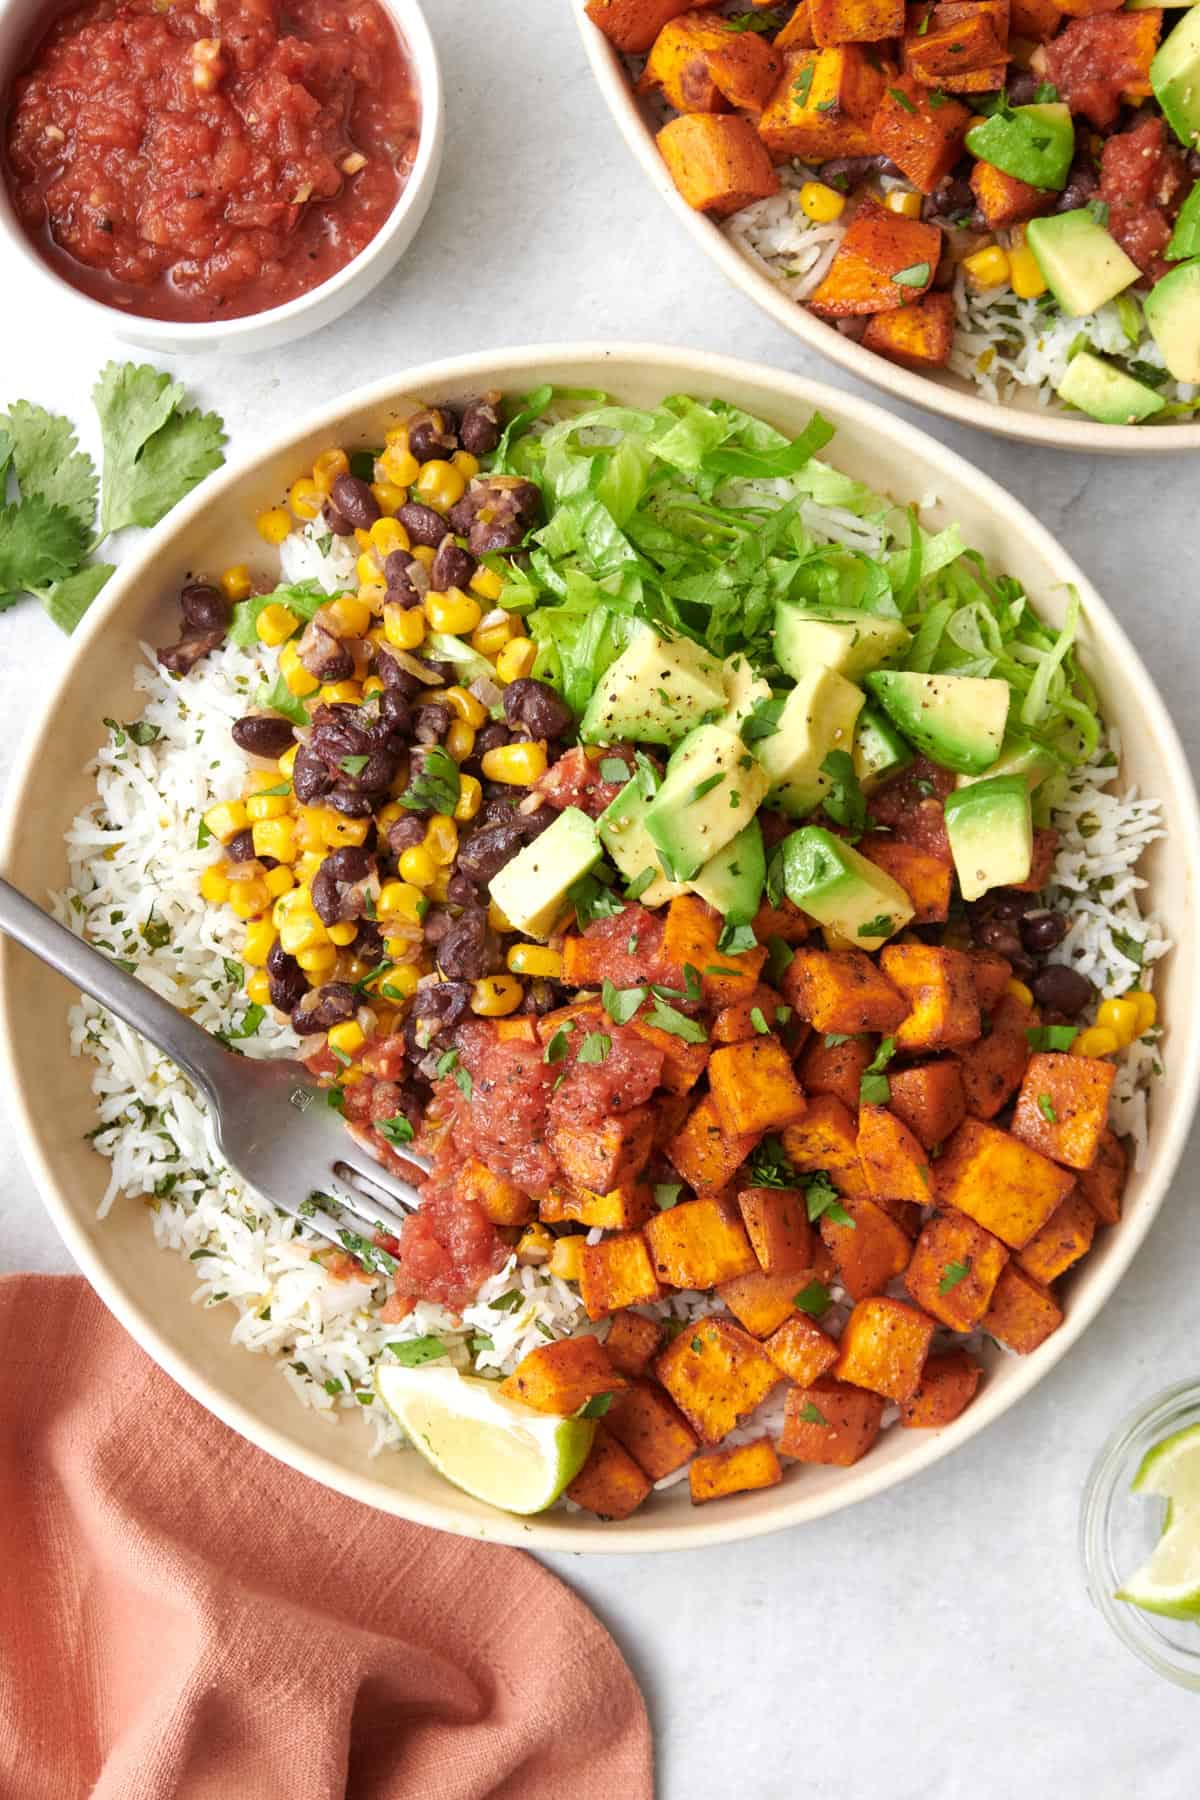 Vegetarian burrito bowl with toppings and a fork dipped inside bowl.